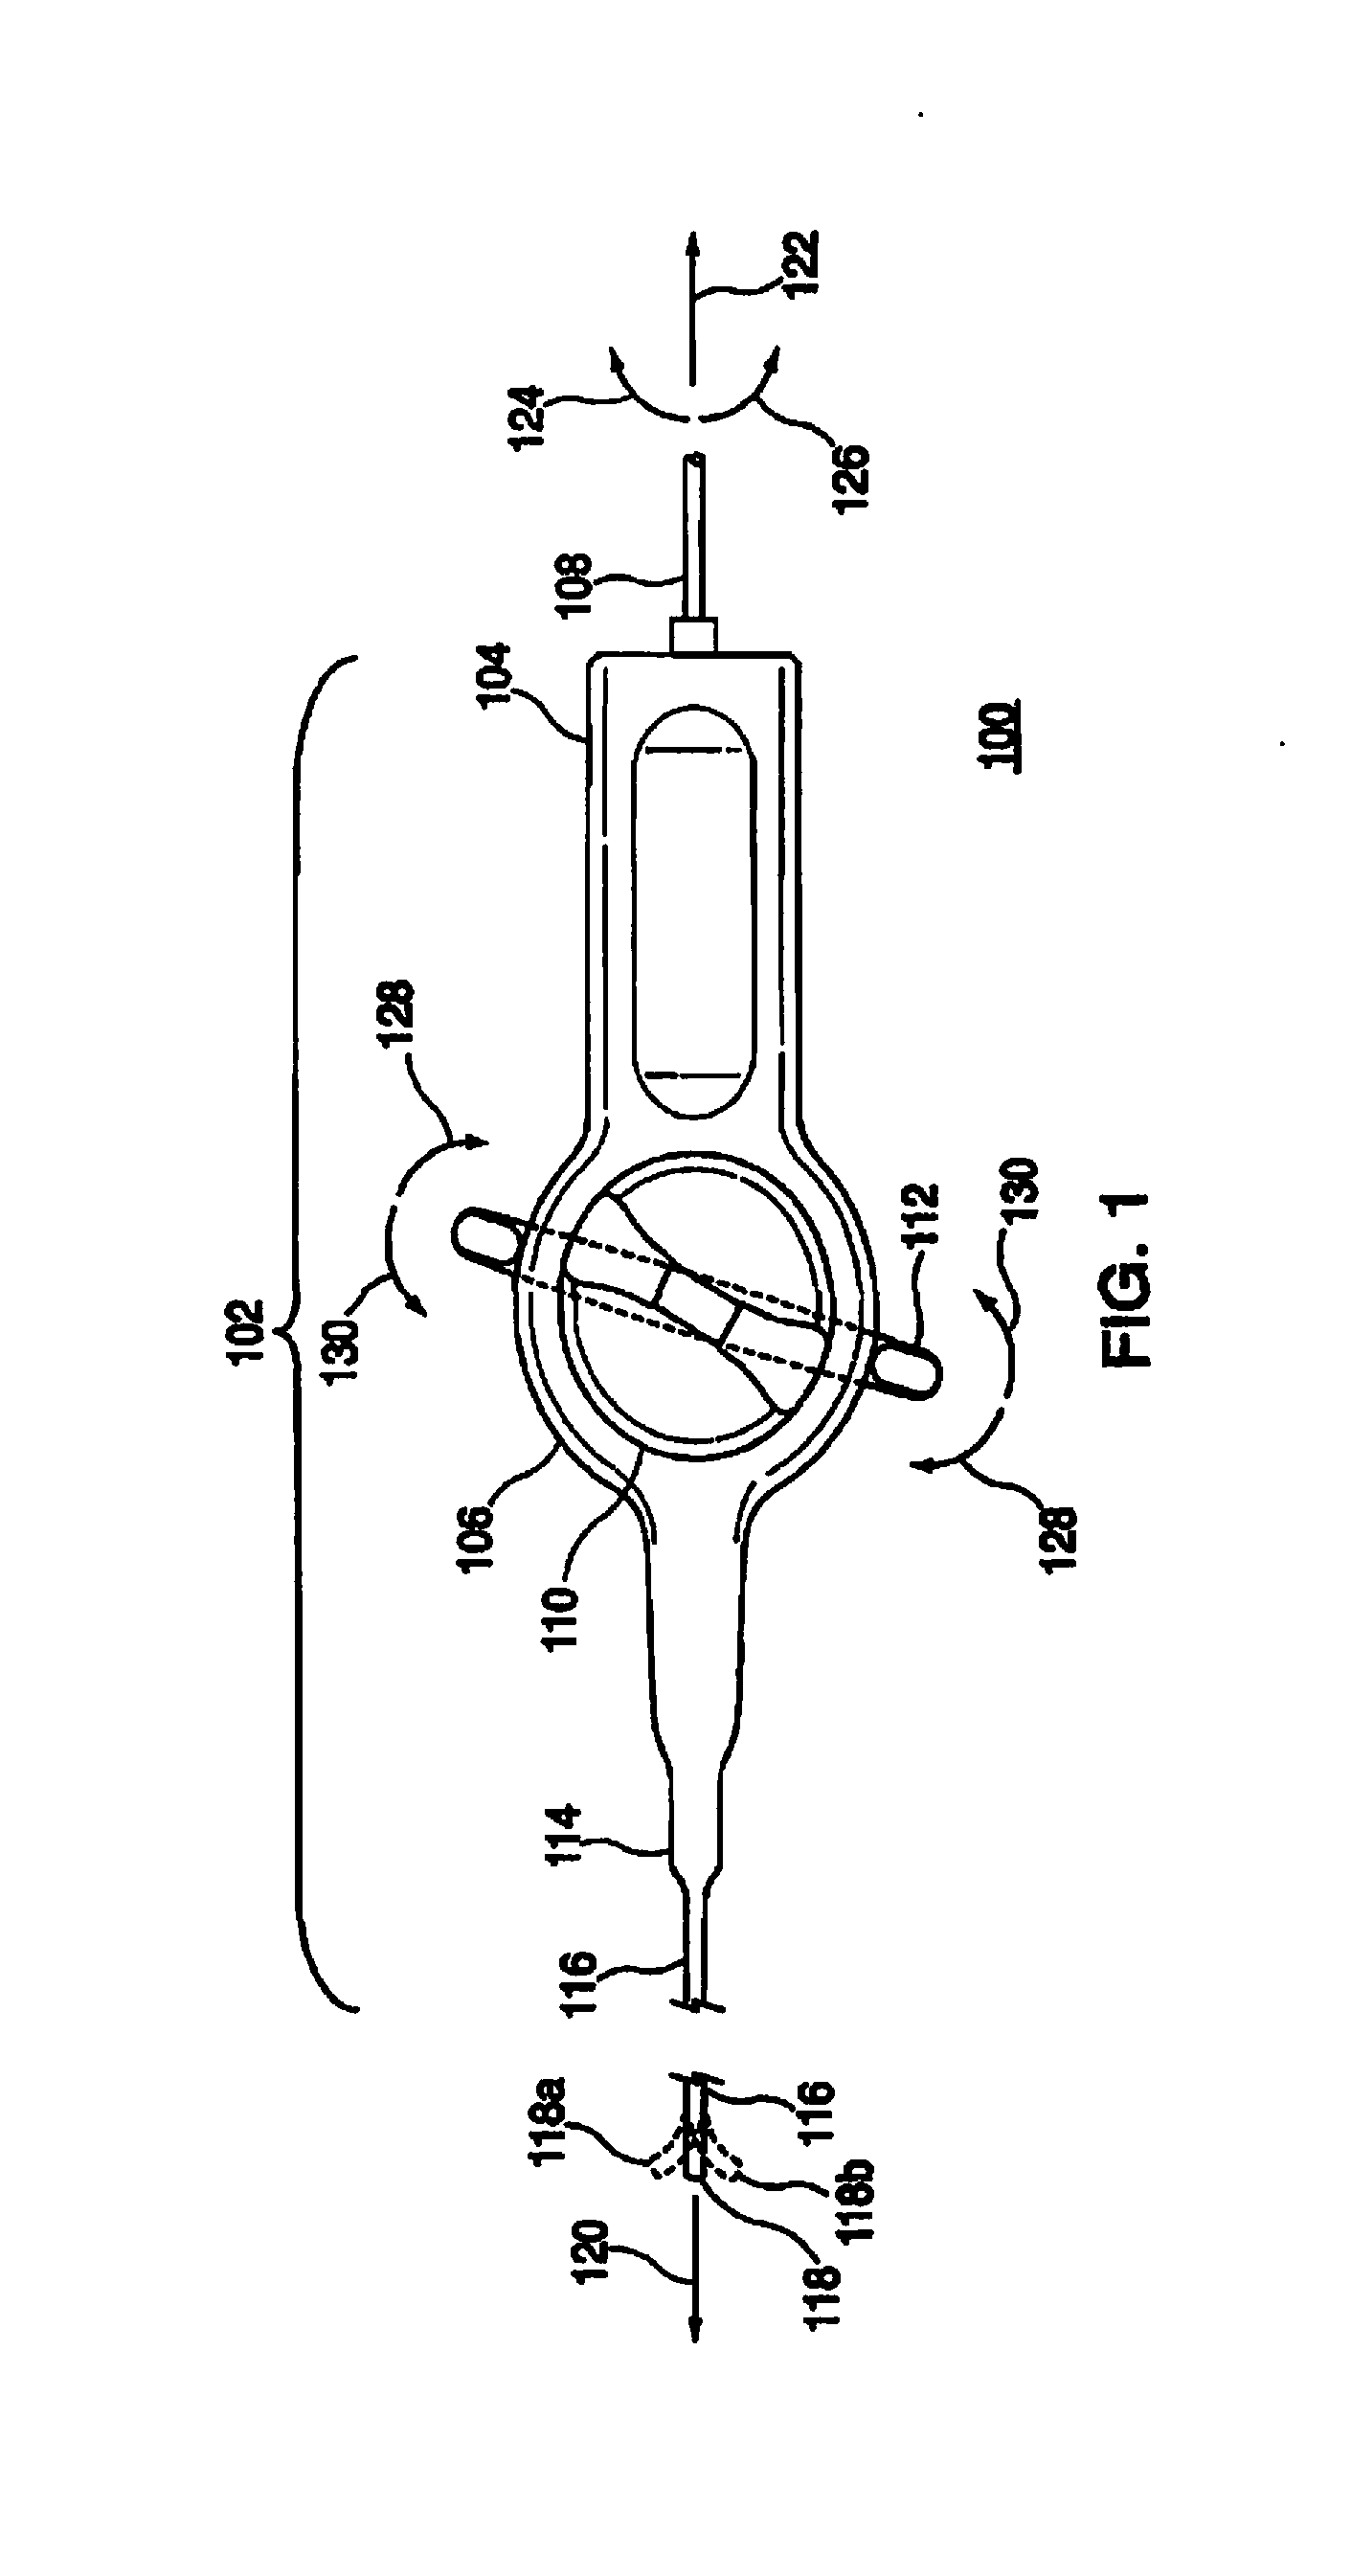 Remotely Controlled Catheter Insertion System with Automatic Control System